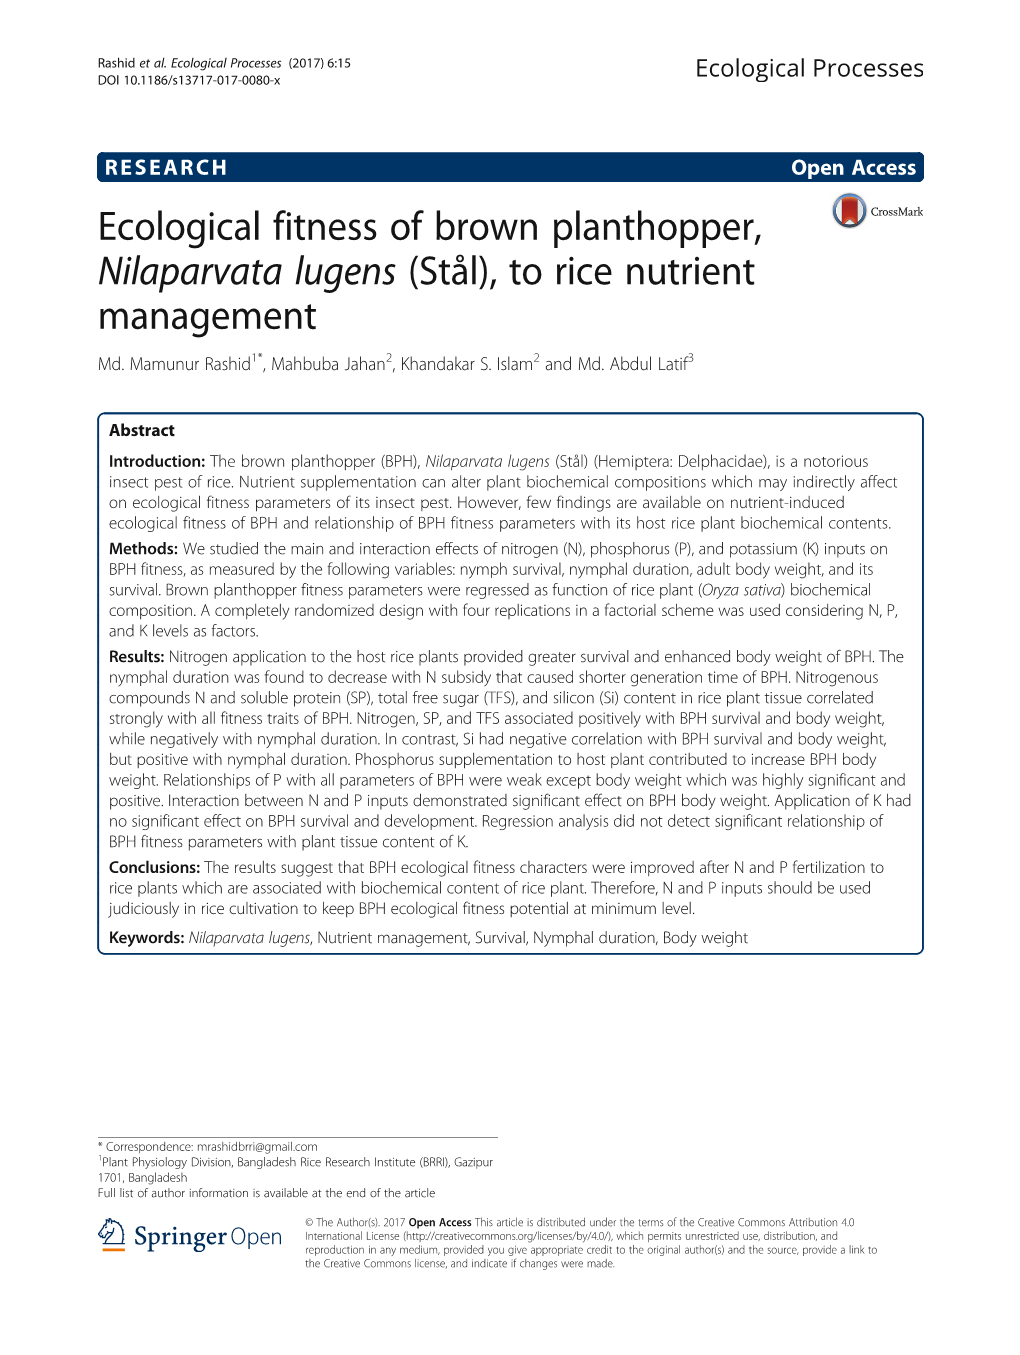 Ecological Fitness of Brown Planthopper, Nilaparvata Lugens (Stål), to Rice Nutrient Management Md